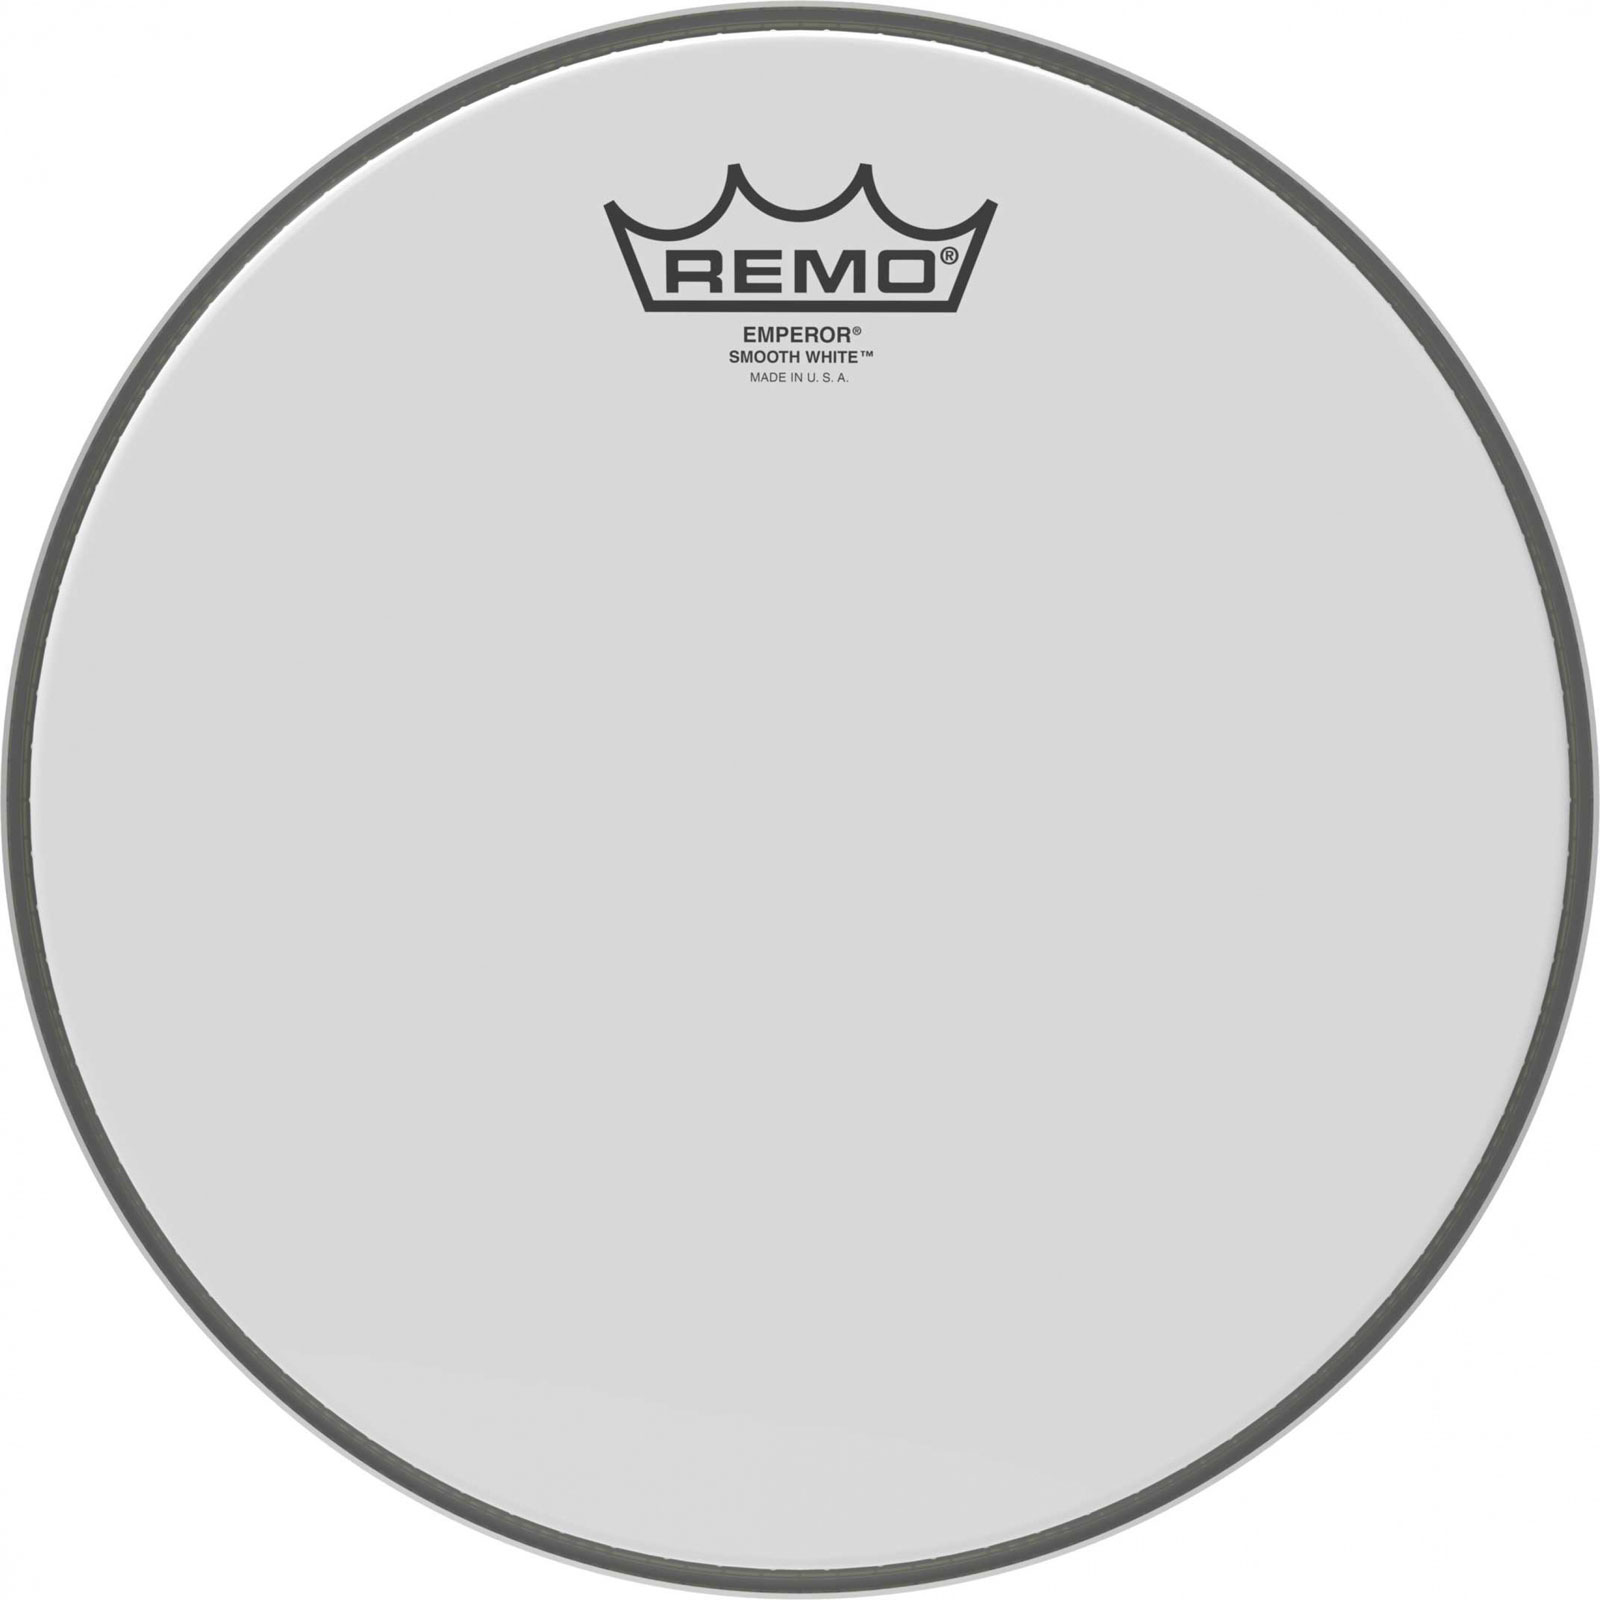 REMO EMPEROR 10 - SMOOTH WHITE - BE-0210-00